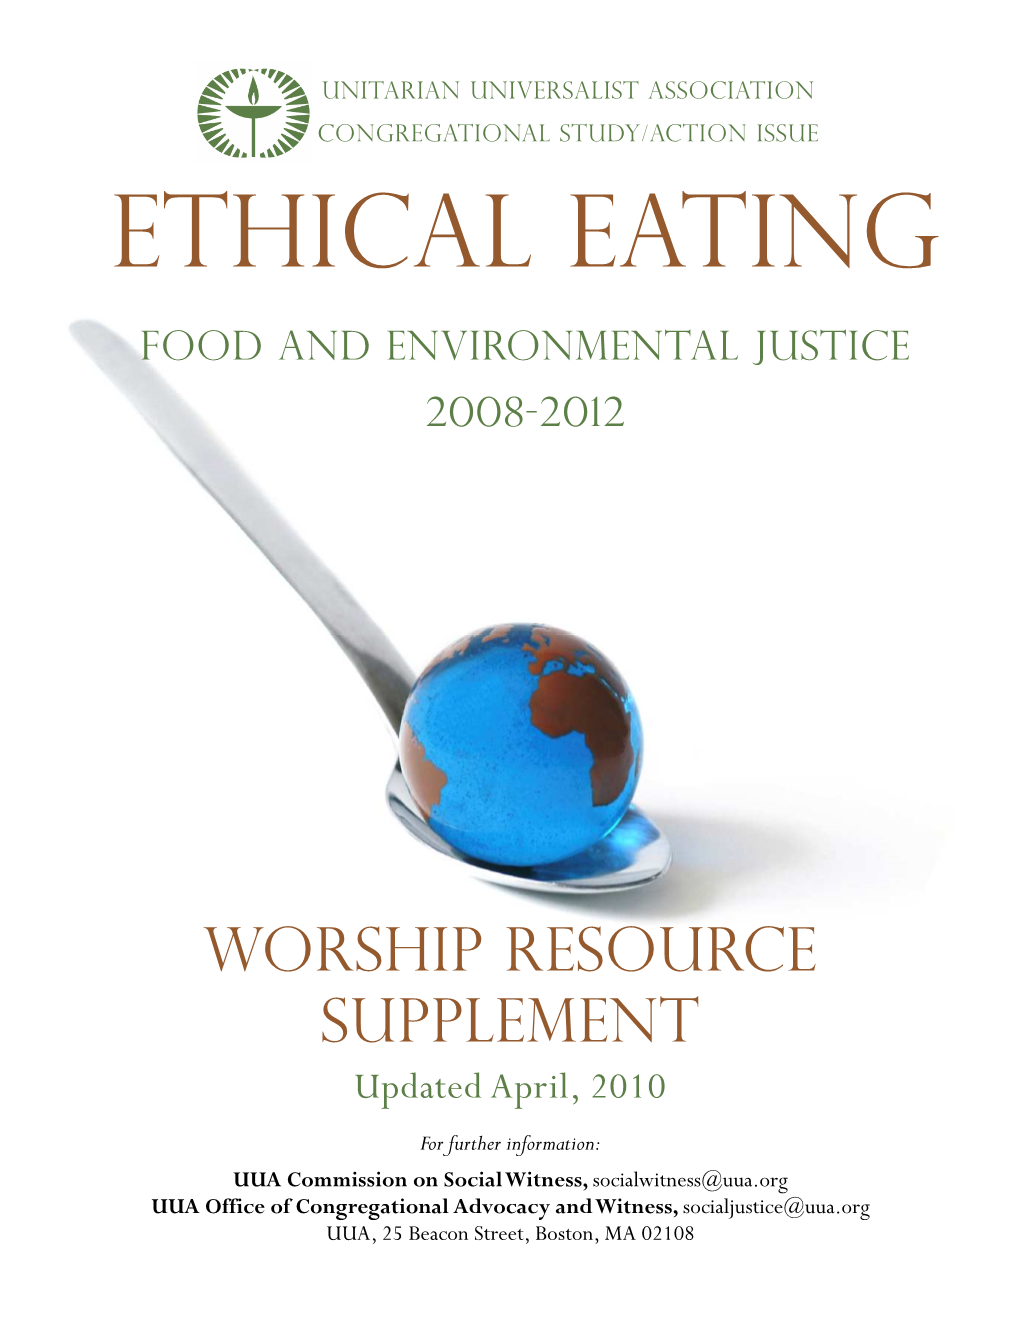 Ethical Eating Worship Resource Supplement 2010-04